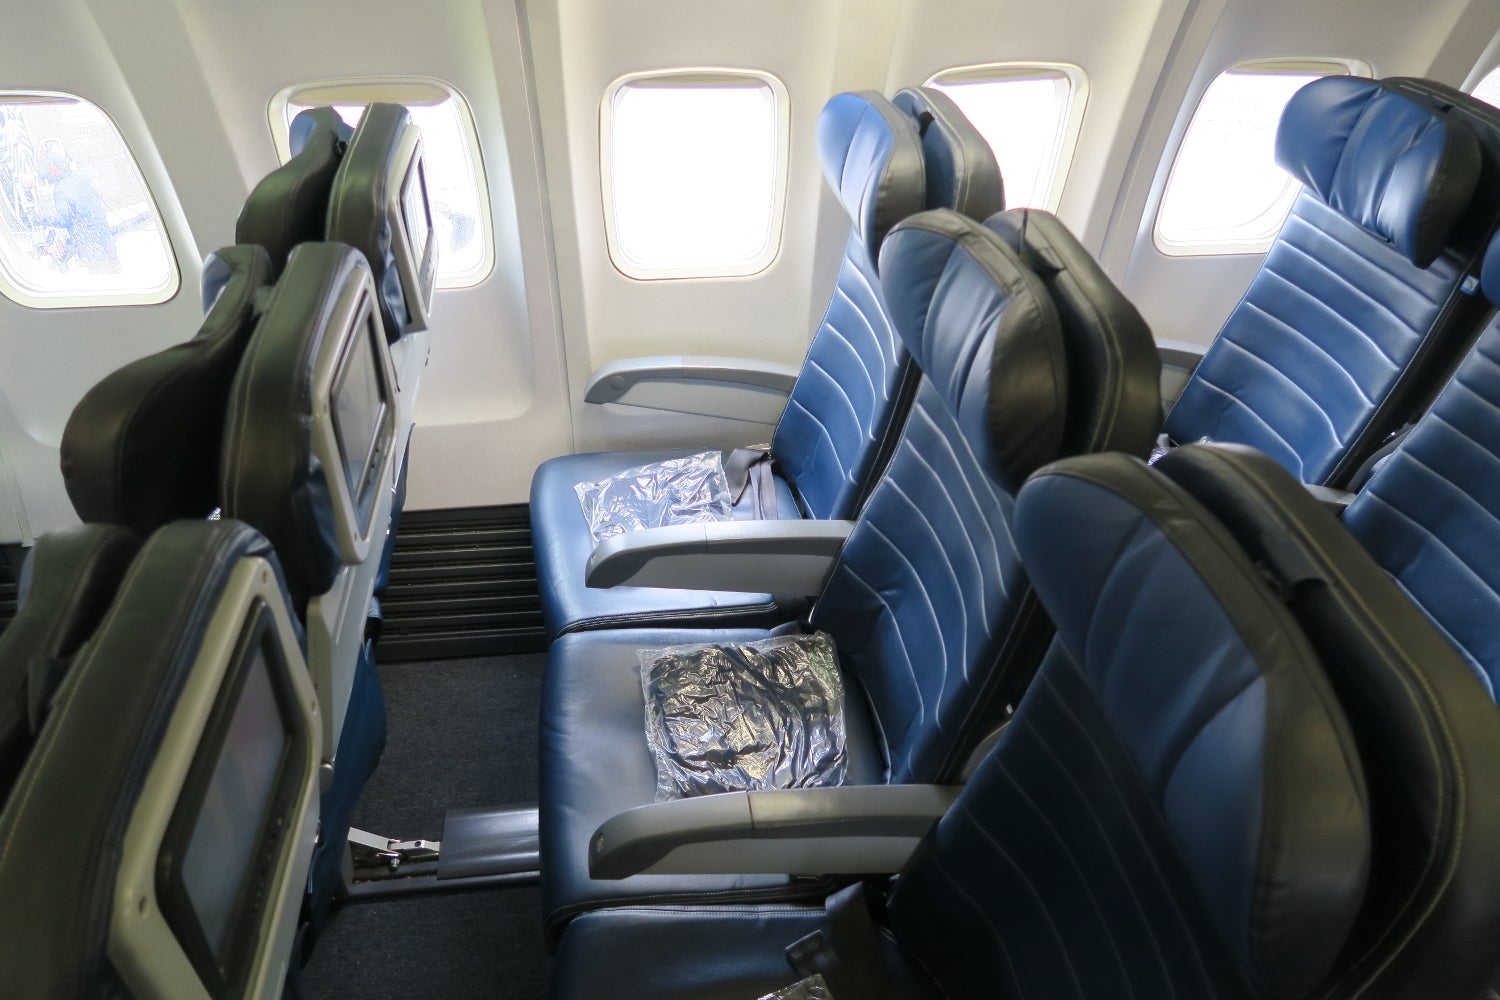 united airlines basic economy seat assignment